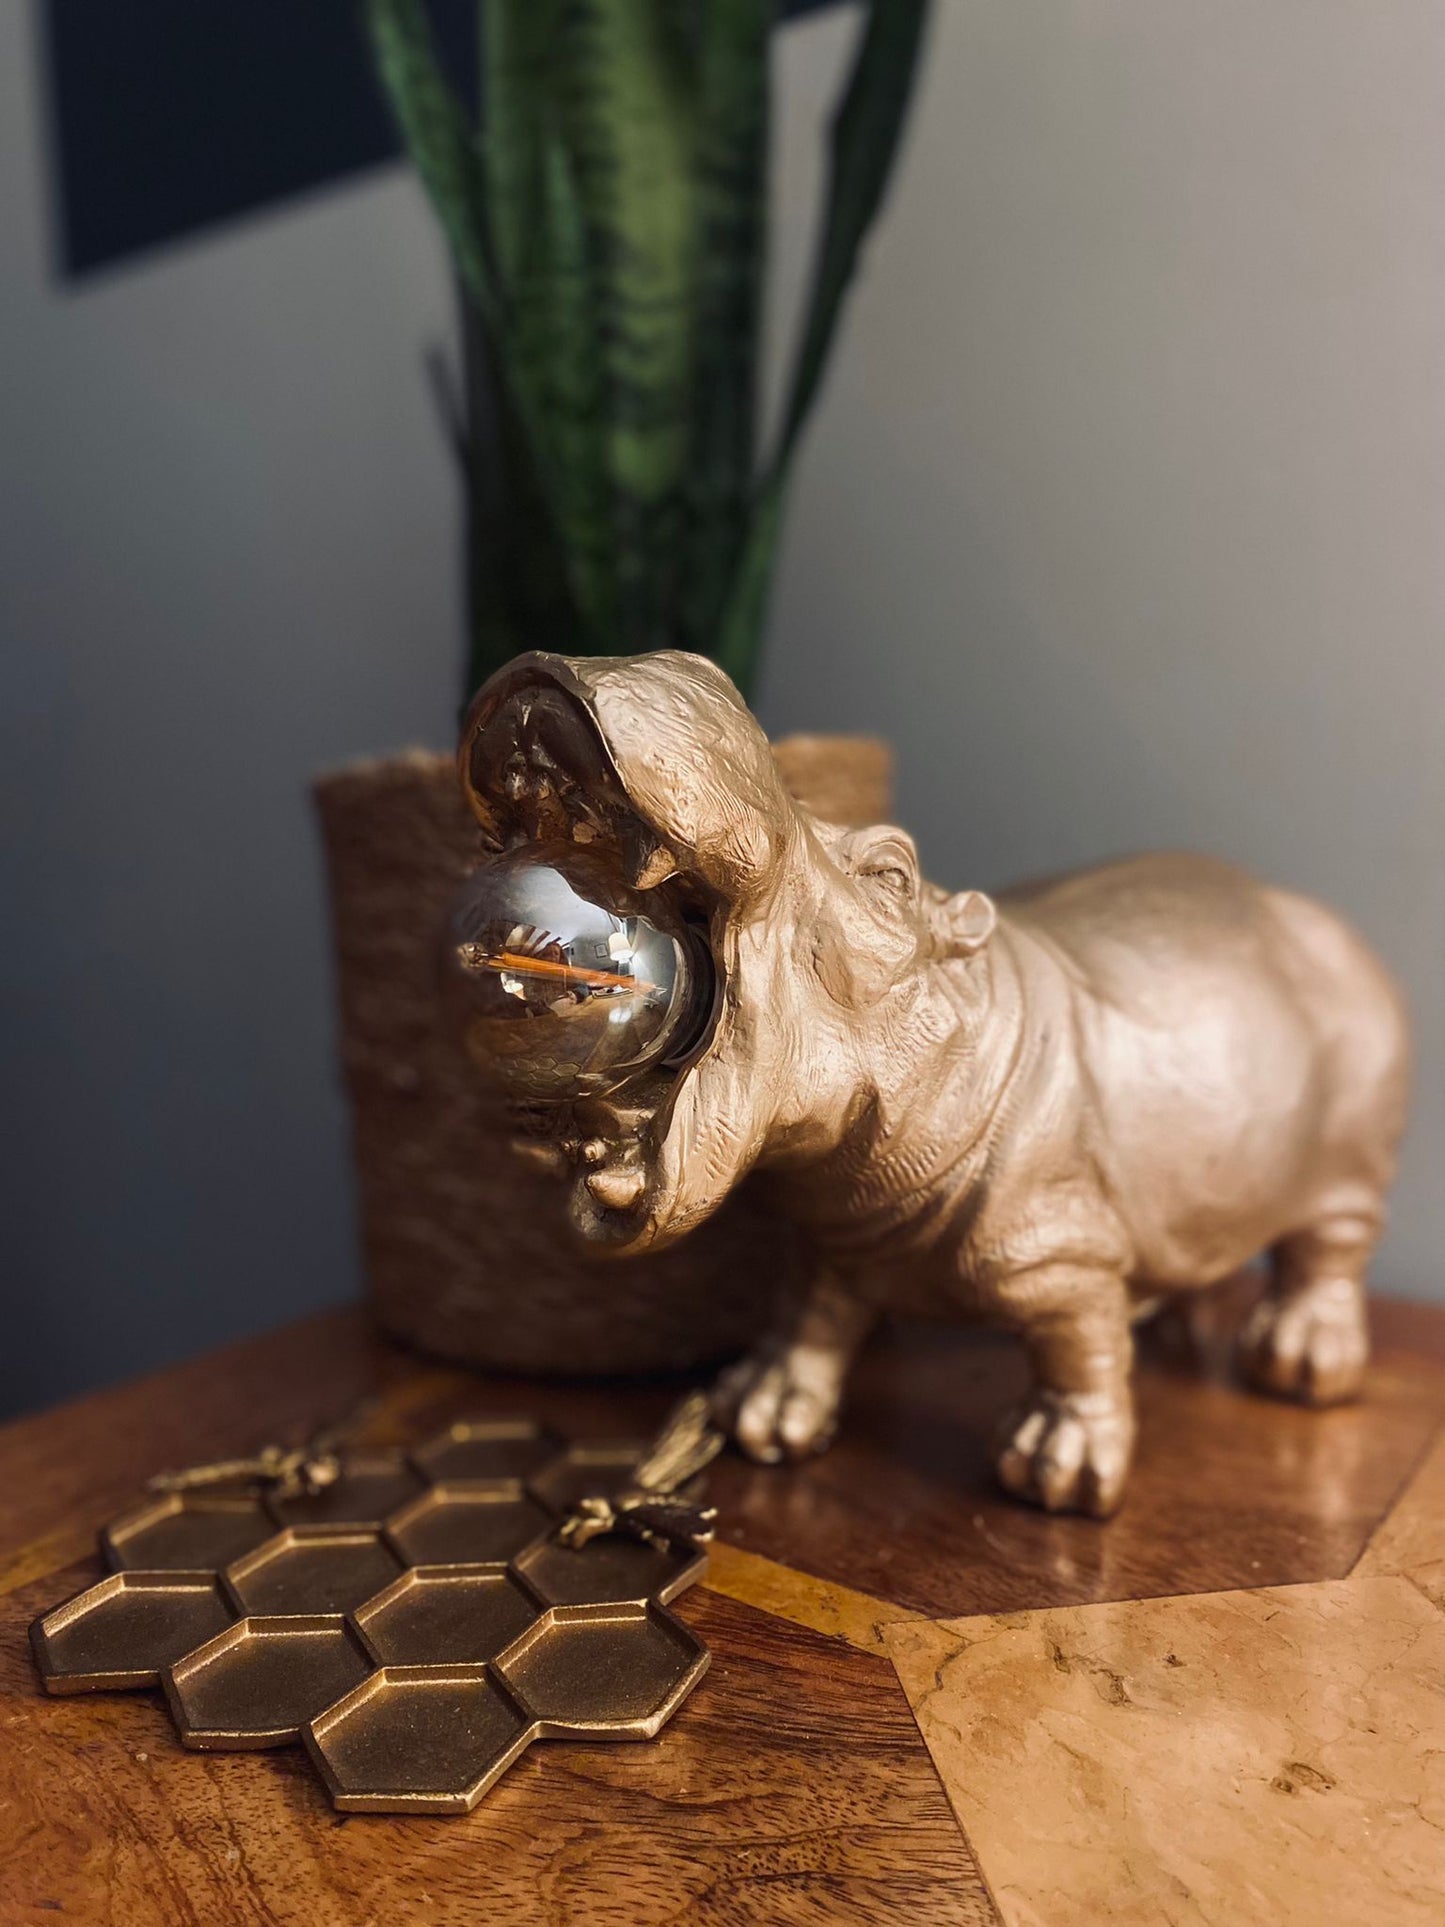 Gold Hippo Table Lamp